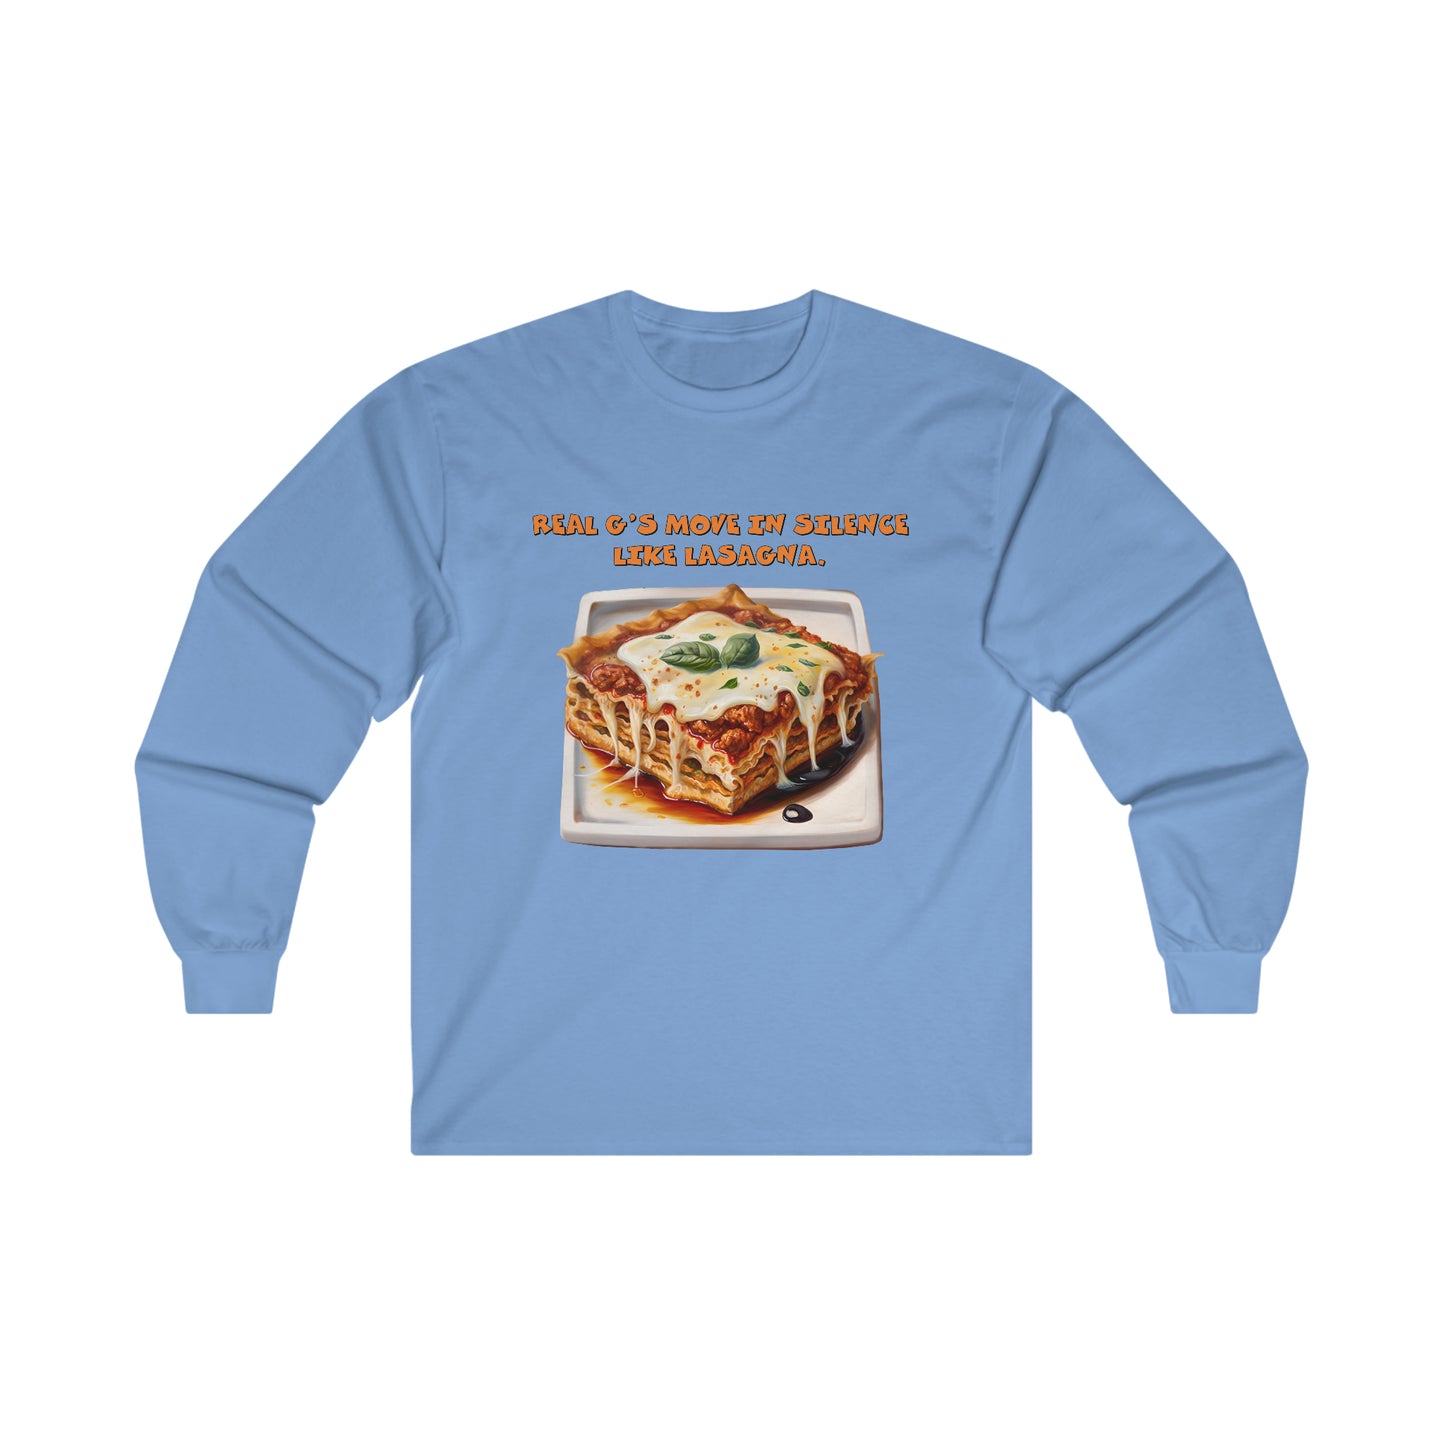 Real G's Move In Silence Like Lasagna. - Ultra Cotton Long Sleeve Tee